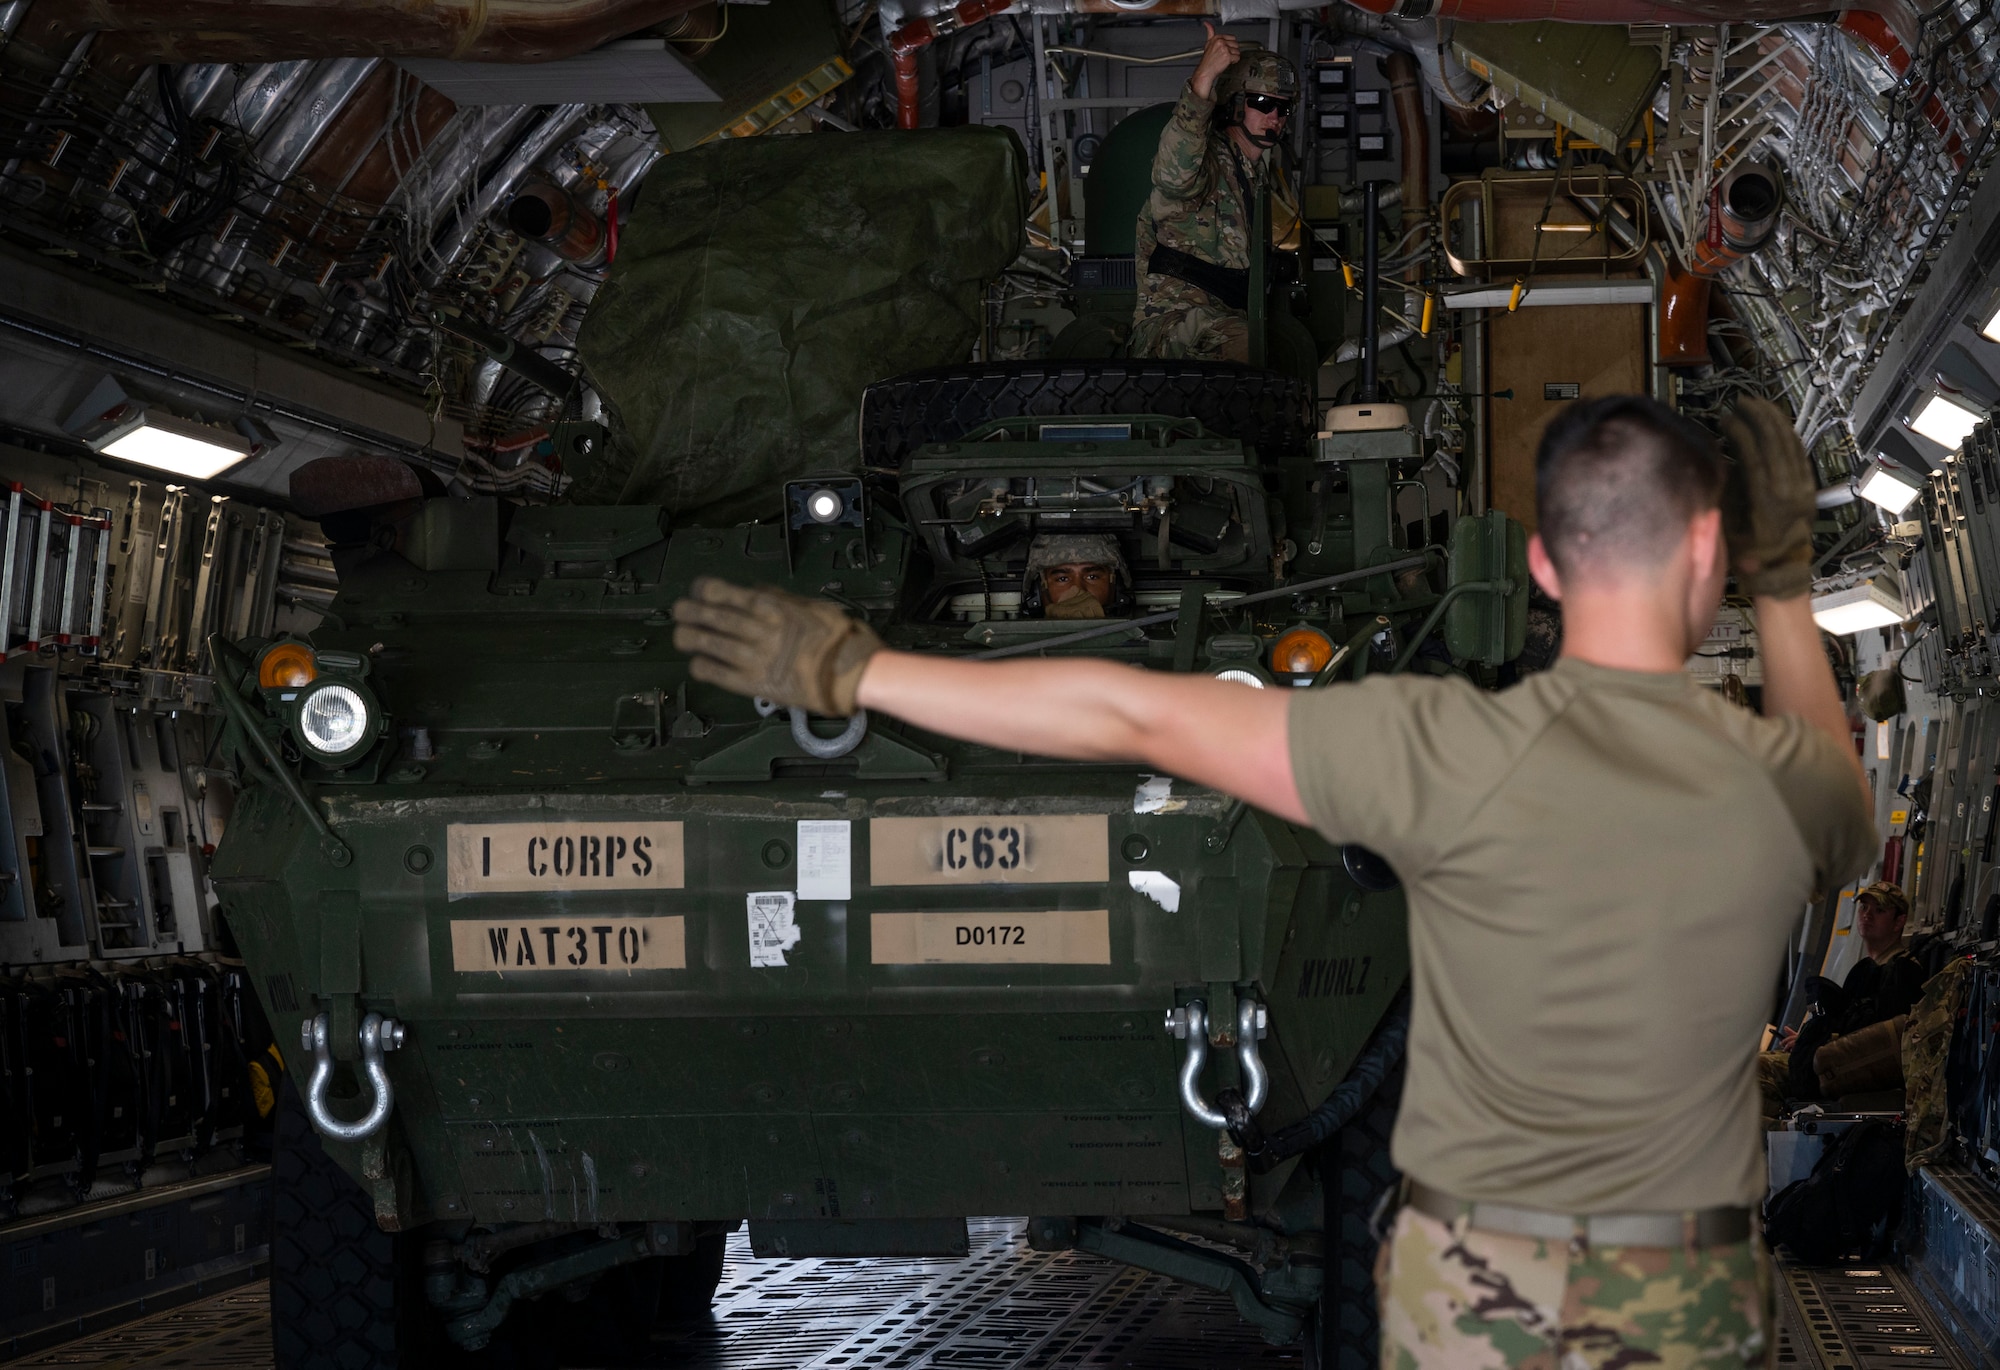 U.S. Air Force Airman 1st Class Aydan Abad, a loadmaster with the 7th Airlift Squadron, marshals an U.S. Army Stryker onto a C-17 Globemaster III during Exercise Rainier War 21B at Andersen Air Force Base, Guam, Nov. 9, 2021. Rainier War 21B exercised and evaluated the 62nd Airlift Wing’s ability to employ the force and their ability to perform during wartime and contingency taskings in a high-intensity, wartime contested, degraded and operationally limited environment while supporting the contingency operations against a near-peer adversary in the U.S. Indo-Pacific Command area of responsibility. (U.S. Air Force photo by Staff Sgt. Rachel Williams)